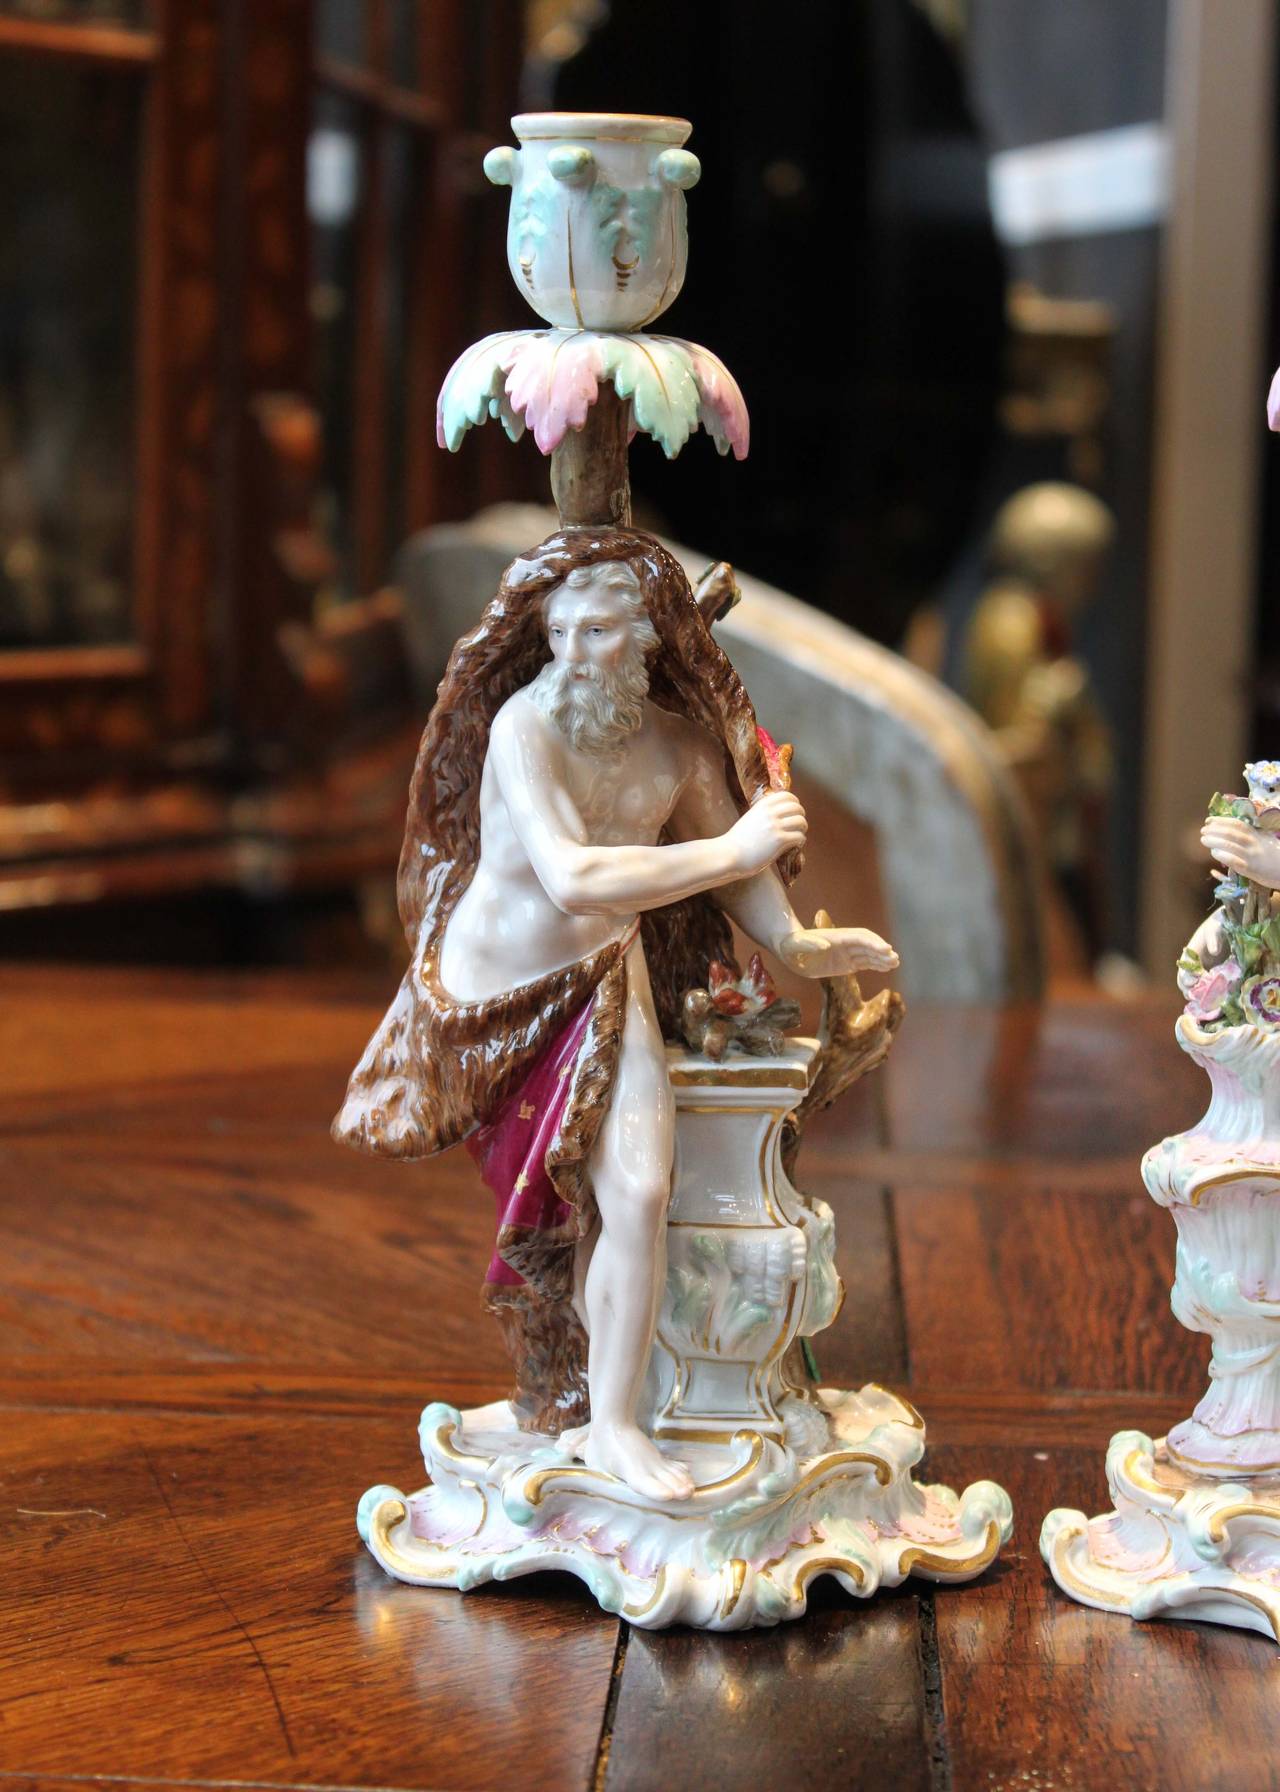 Pair of 19th Century figural porcelain candlesticks by German maker Meissen. Restoration noted, in wonderful condition.

5